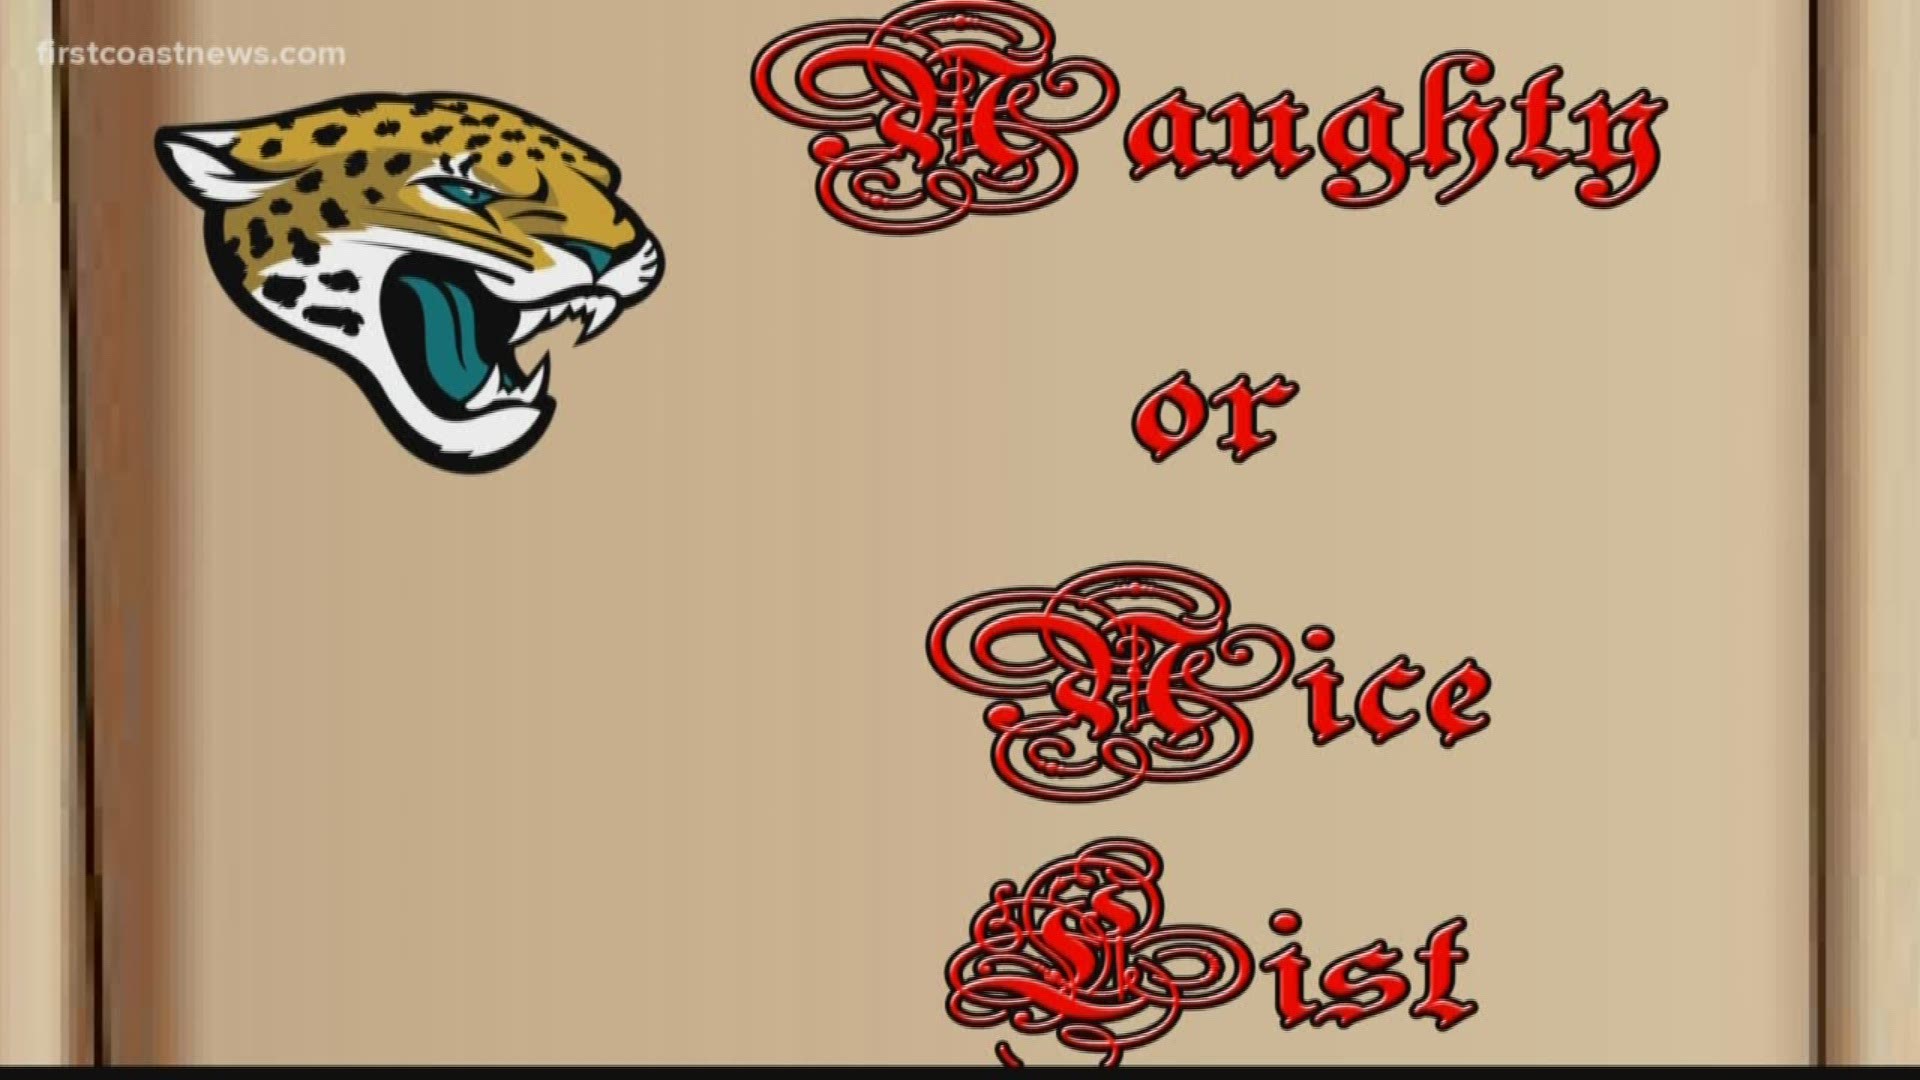 Bringing you another special message straight from the North Pole. This is the Jaguars' naughty or nice list.